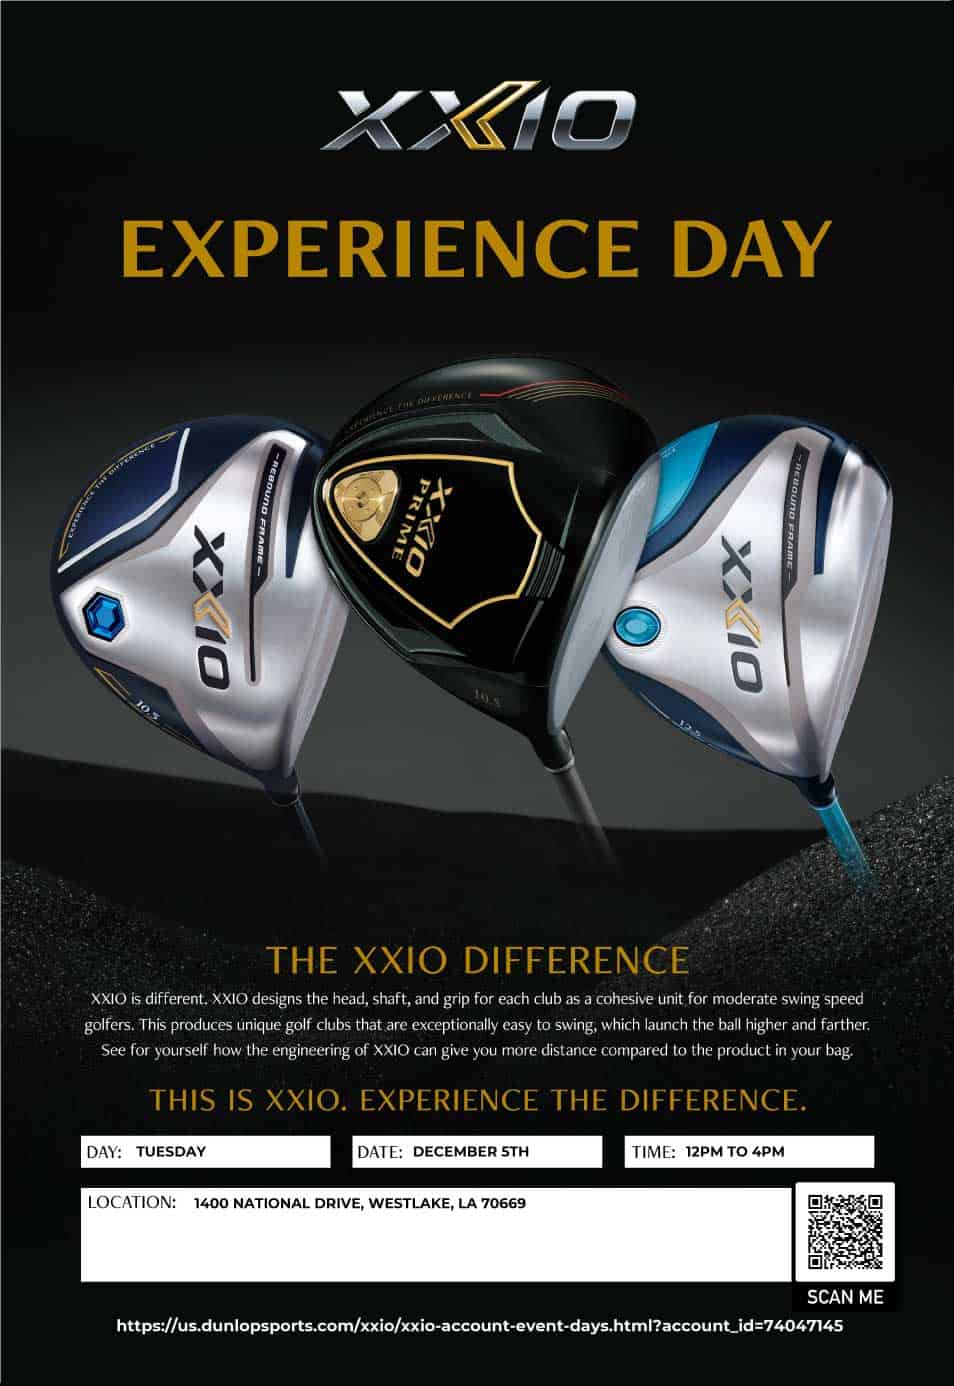 the new xr10 golf club is shown in this advertisement